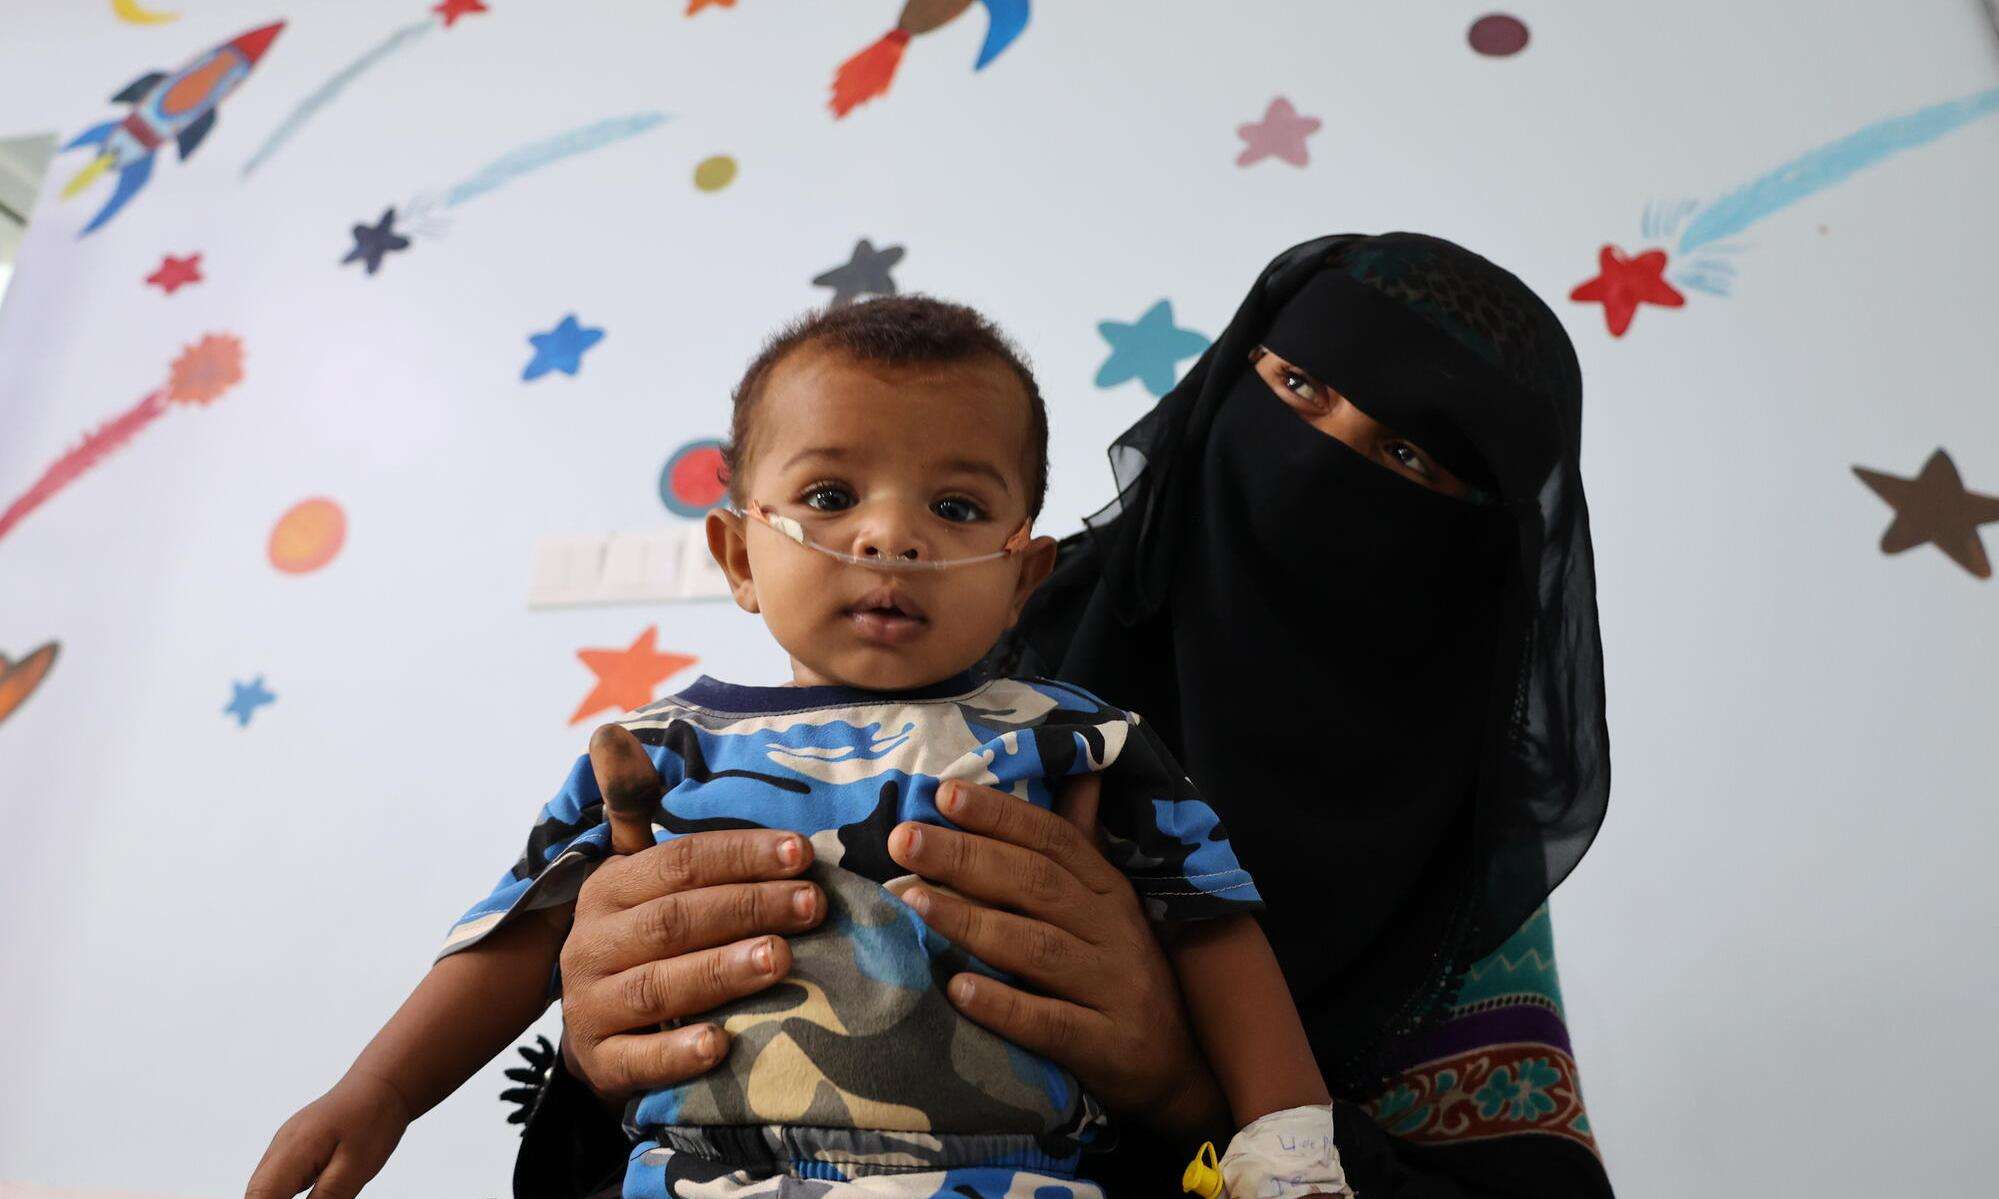 Karima holds her 6-month-old son Ahmed, who is receiving treatment at Al-Qanawis Mother and Child Hospital in Al-Hudaydah governorate, Yemen.